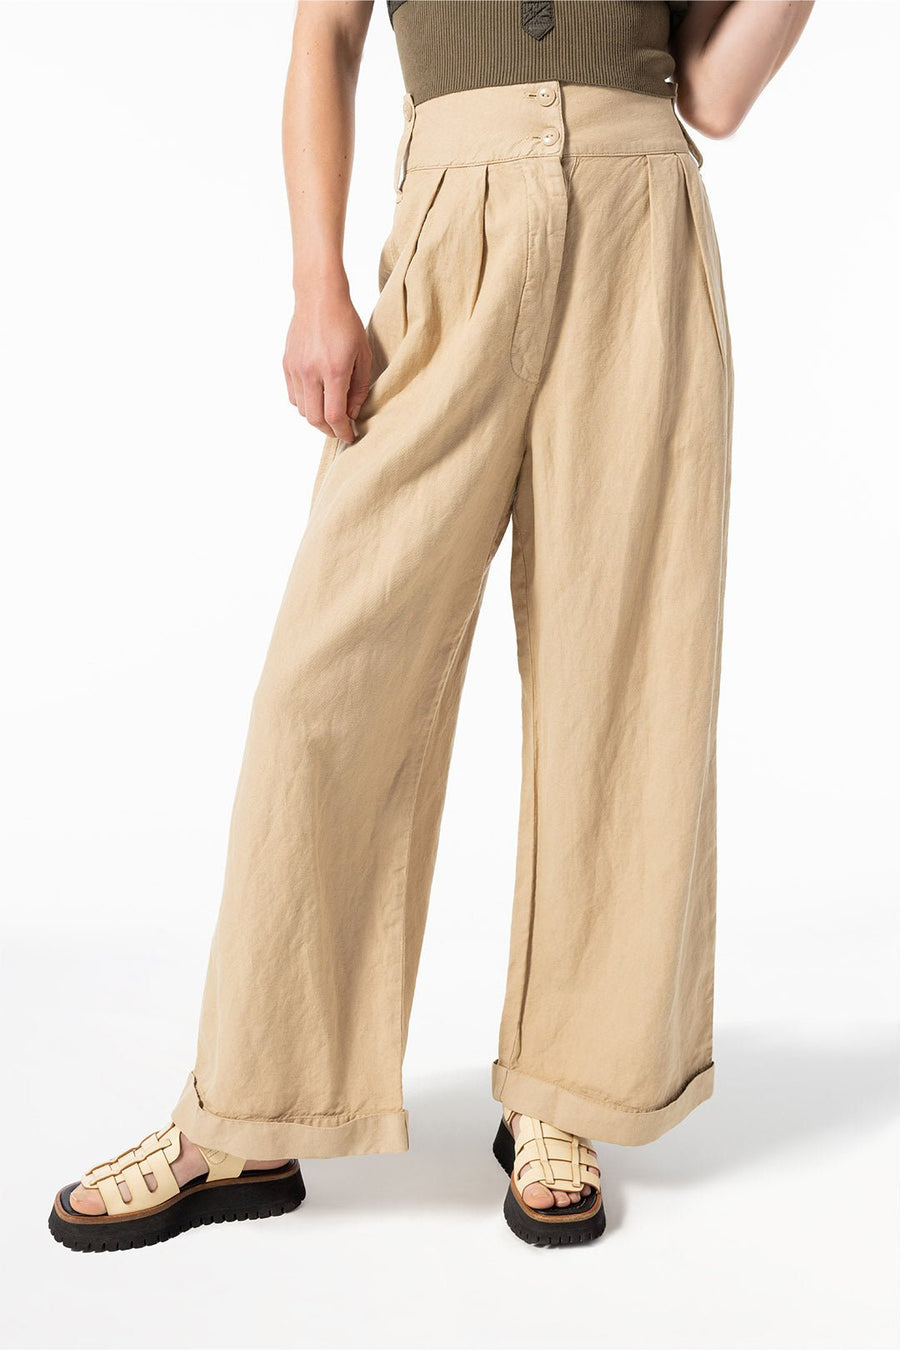 UTILITY HIGH WAISTED WIDE LEG PANT, KHAKI - Burning Torch Online Boutique